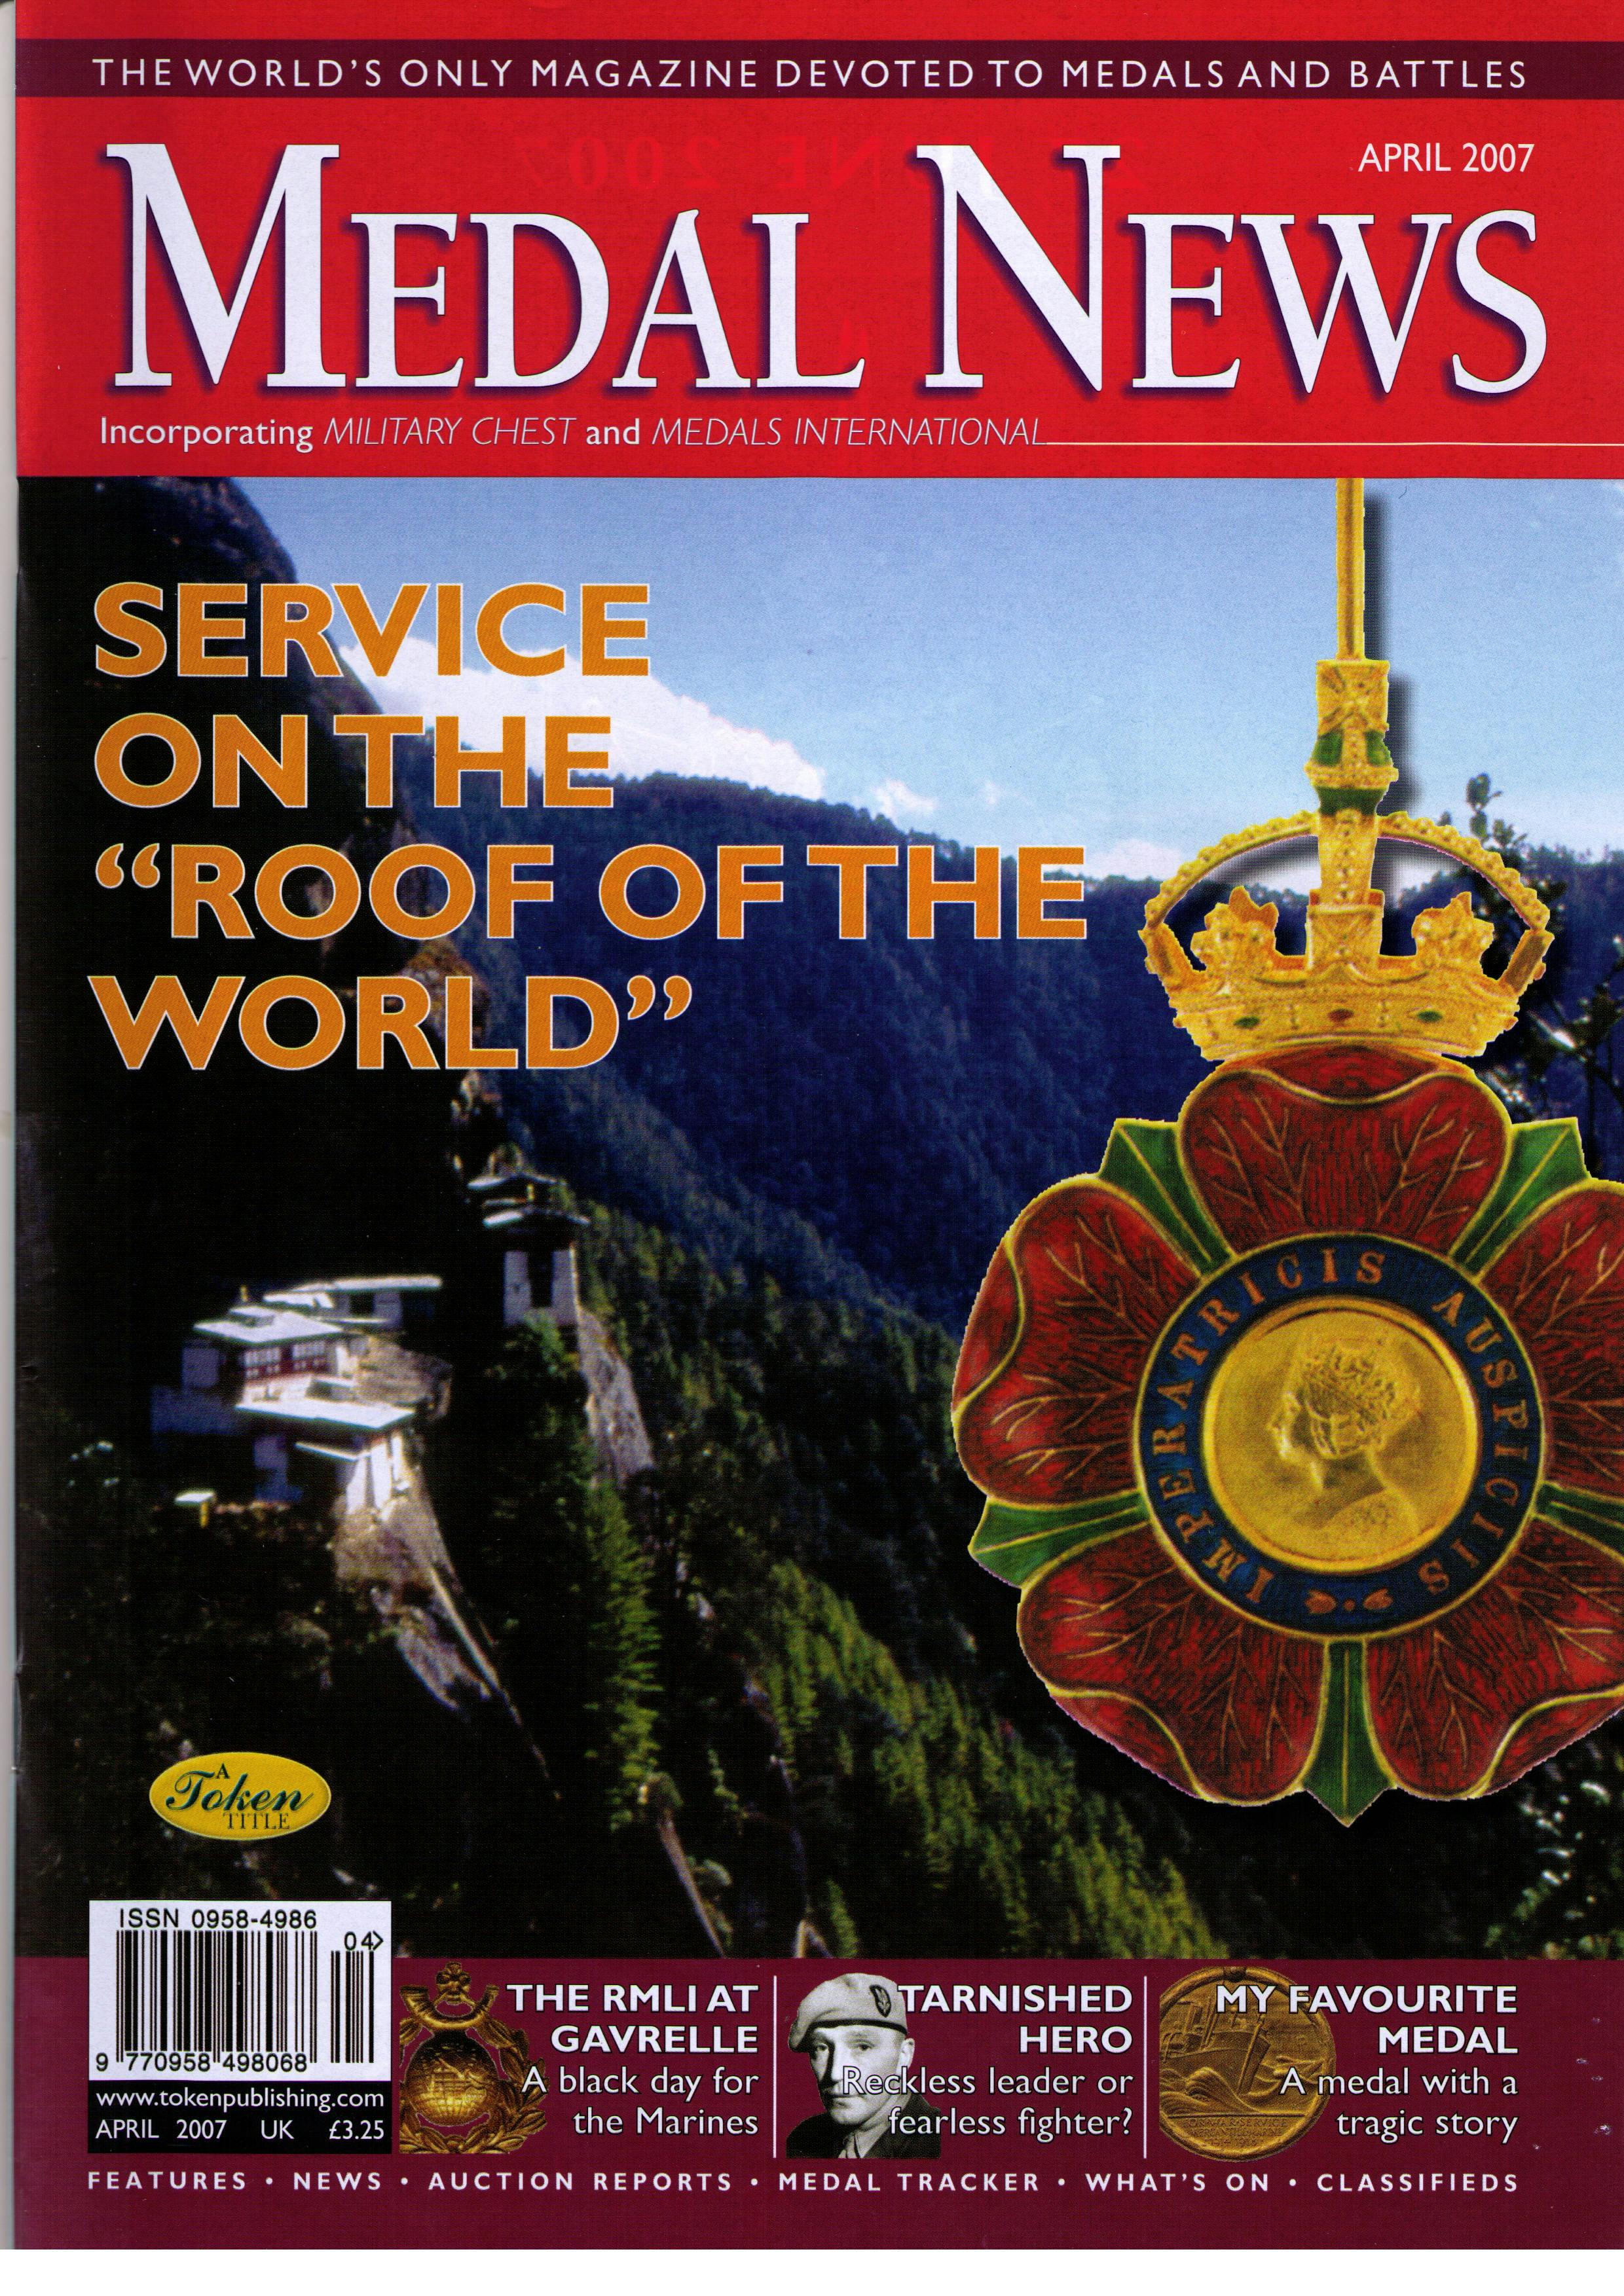 Front cover of 'Causing a stir', Medal News April 2007, Volume 45, Number 4 by Token Publishing